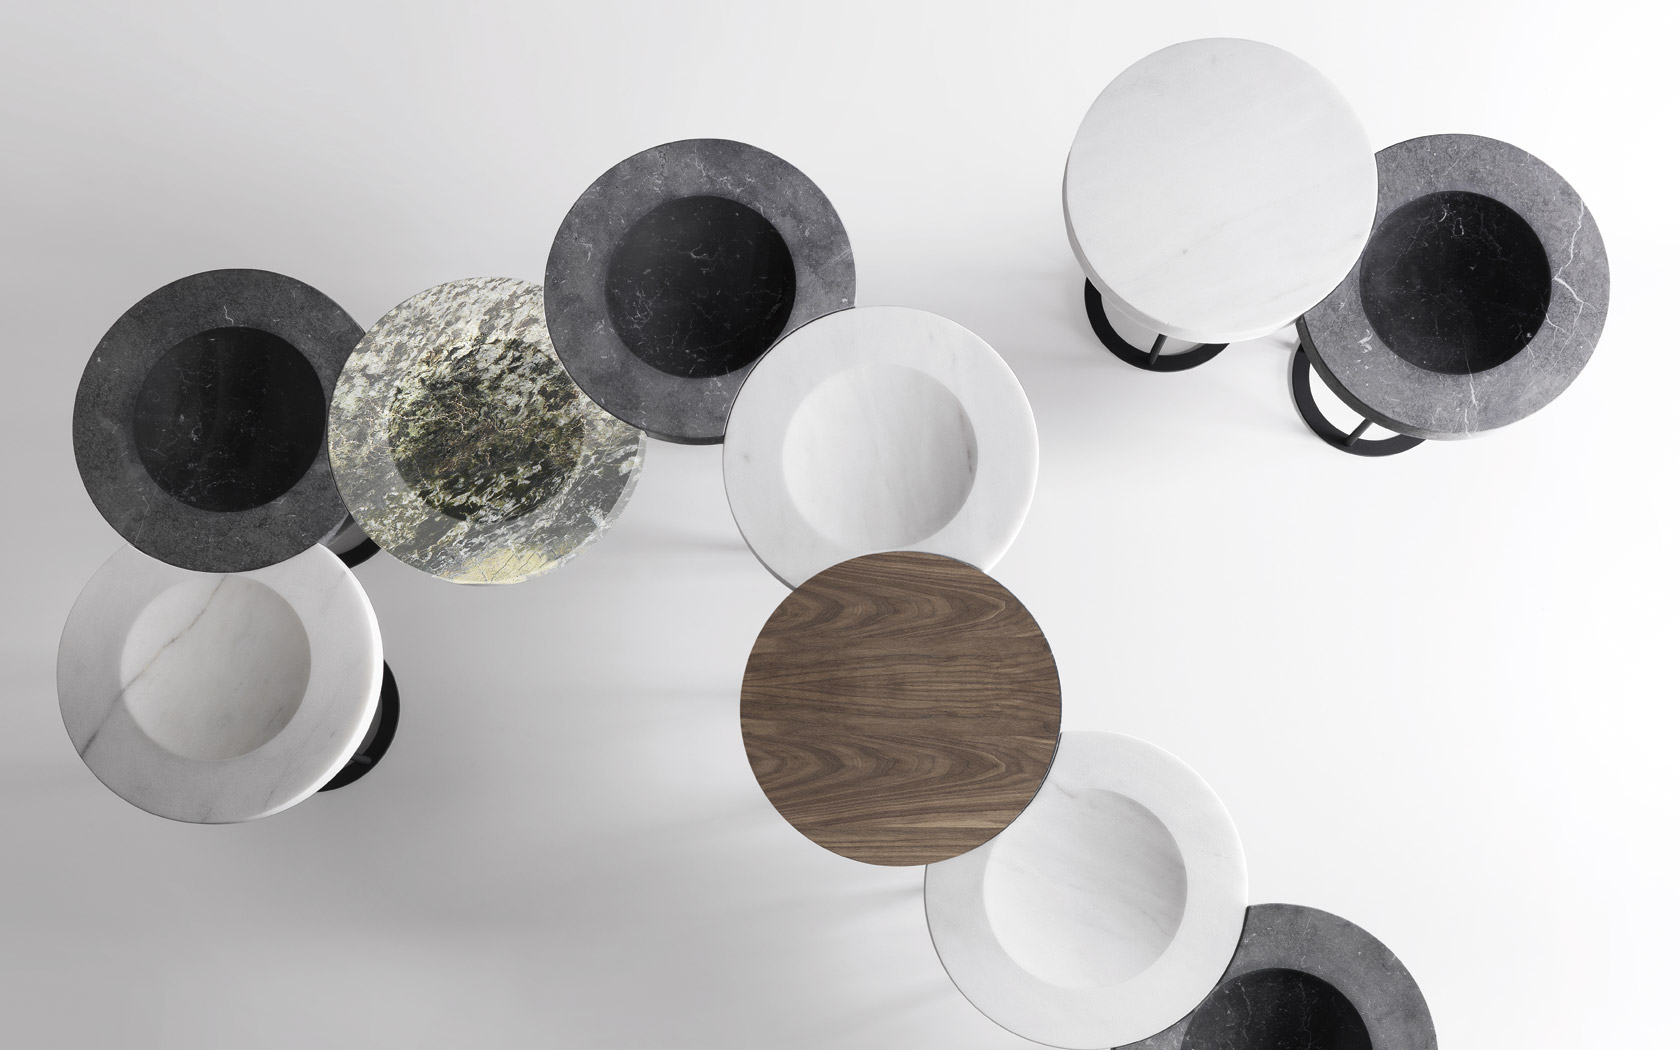 New Moon table is a unique and elegant item inspired by the moon and its phases and showing them off with its design